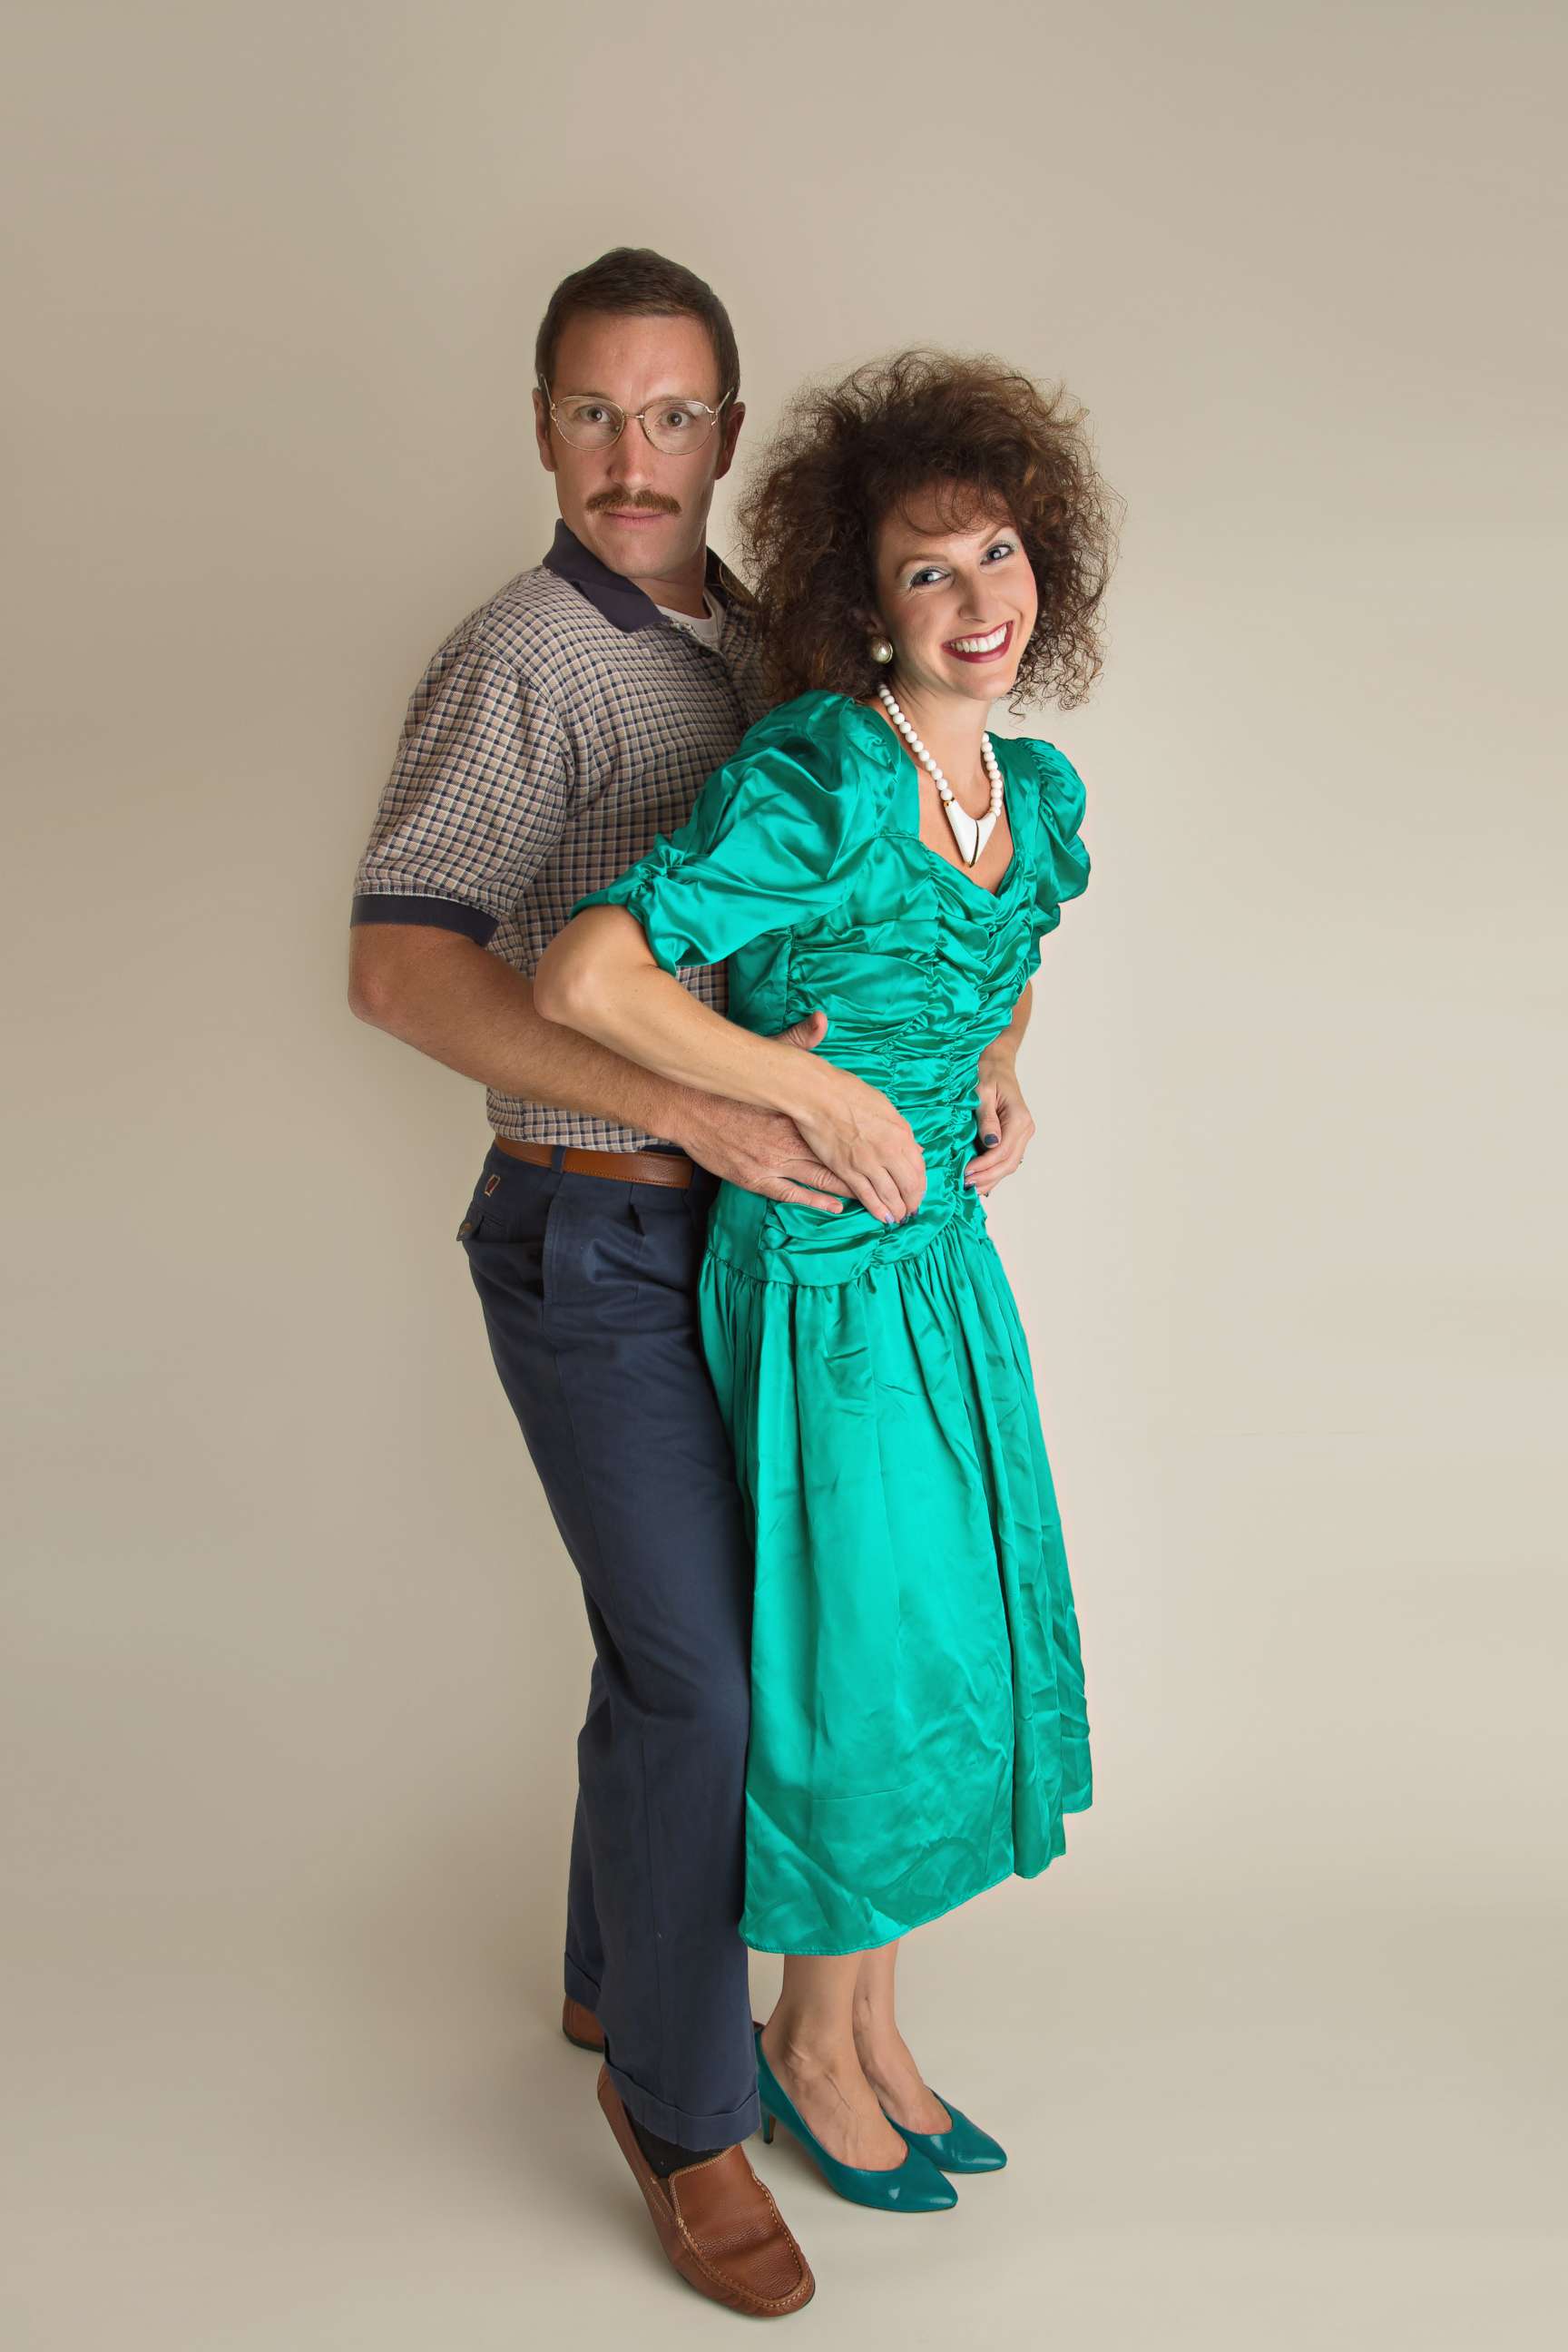 This Couple Did an '80s Themed Photo Shoot for Their 10th